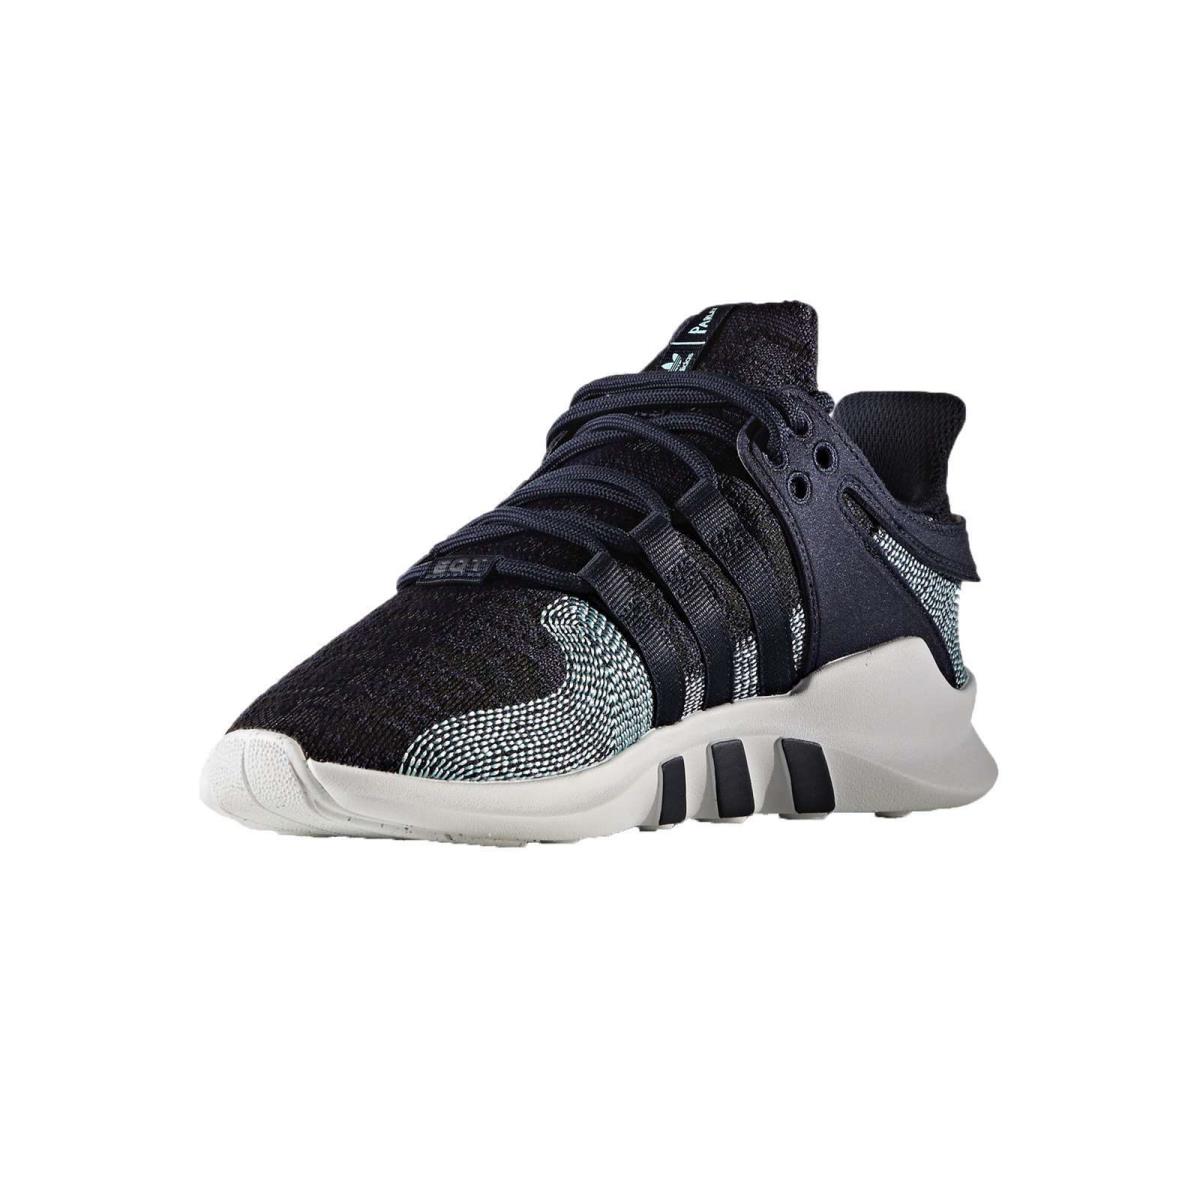 Adidas Men s Athletic Shoes Eqt Support Adv CK Parley Running Sneakers Blue